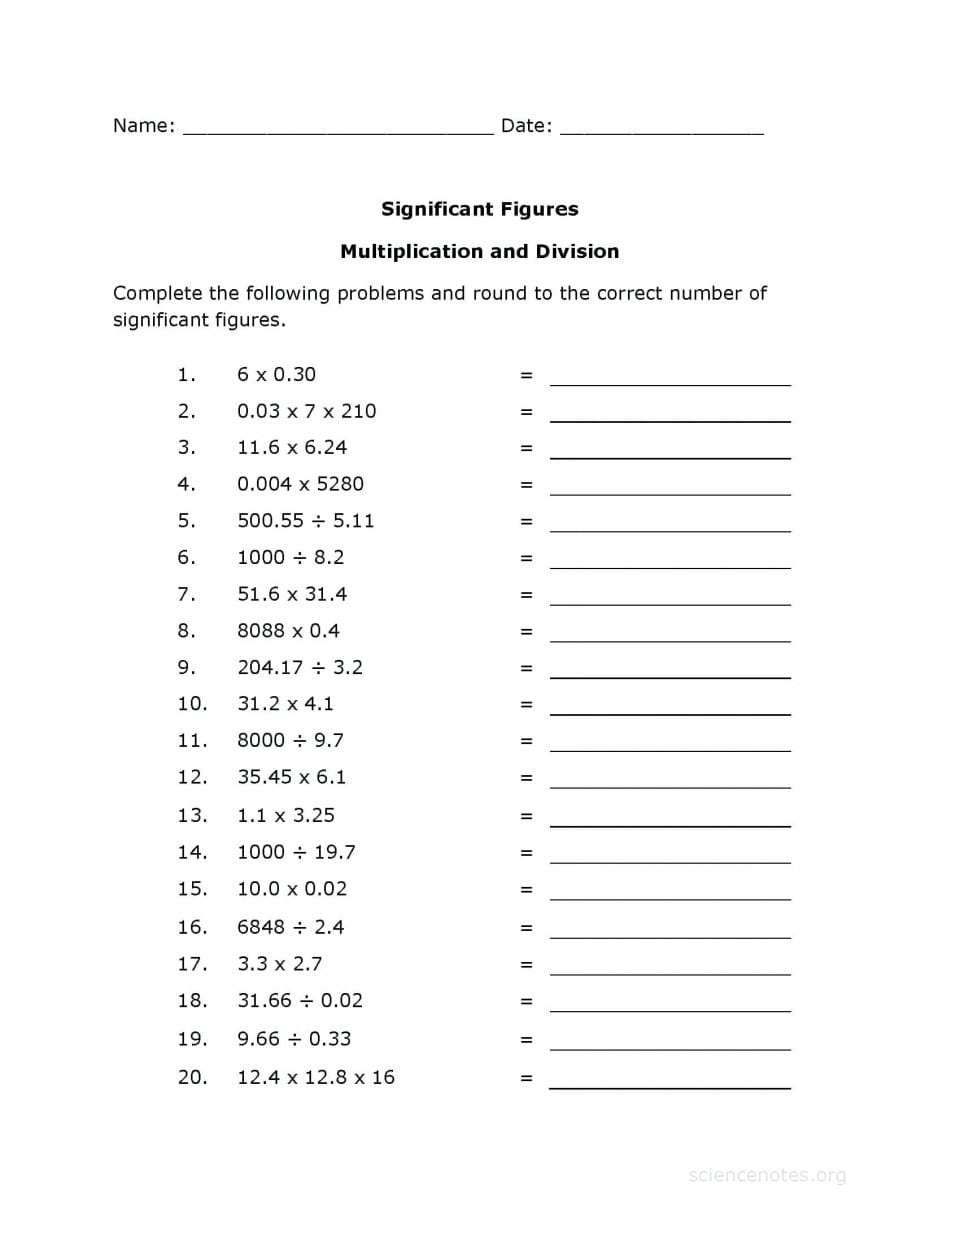 Adding Subtracting Multiplying And Dividing Significant Figures Worksheet With Answers